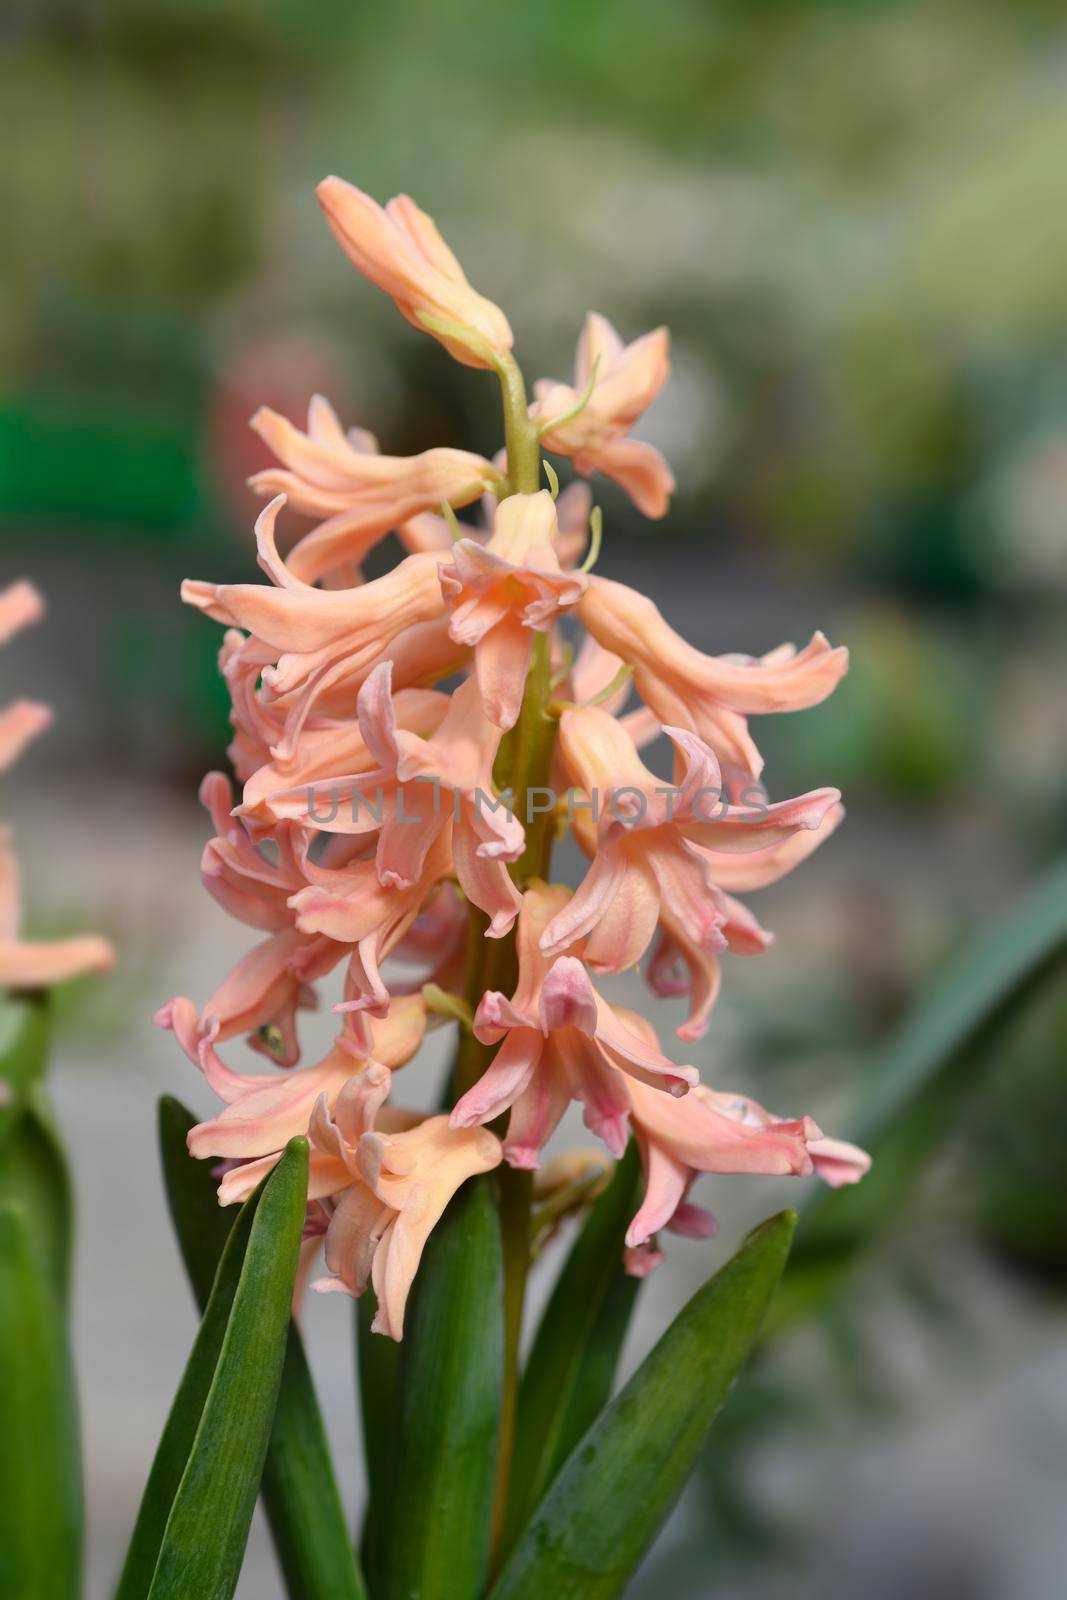 Hyacinth Gipsy Queen flower - Latin name - Hyacinthus orientalis Gipsy Queen